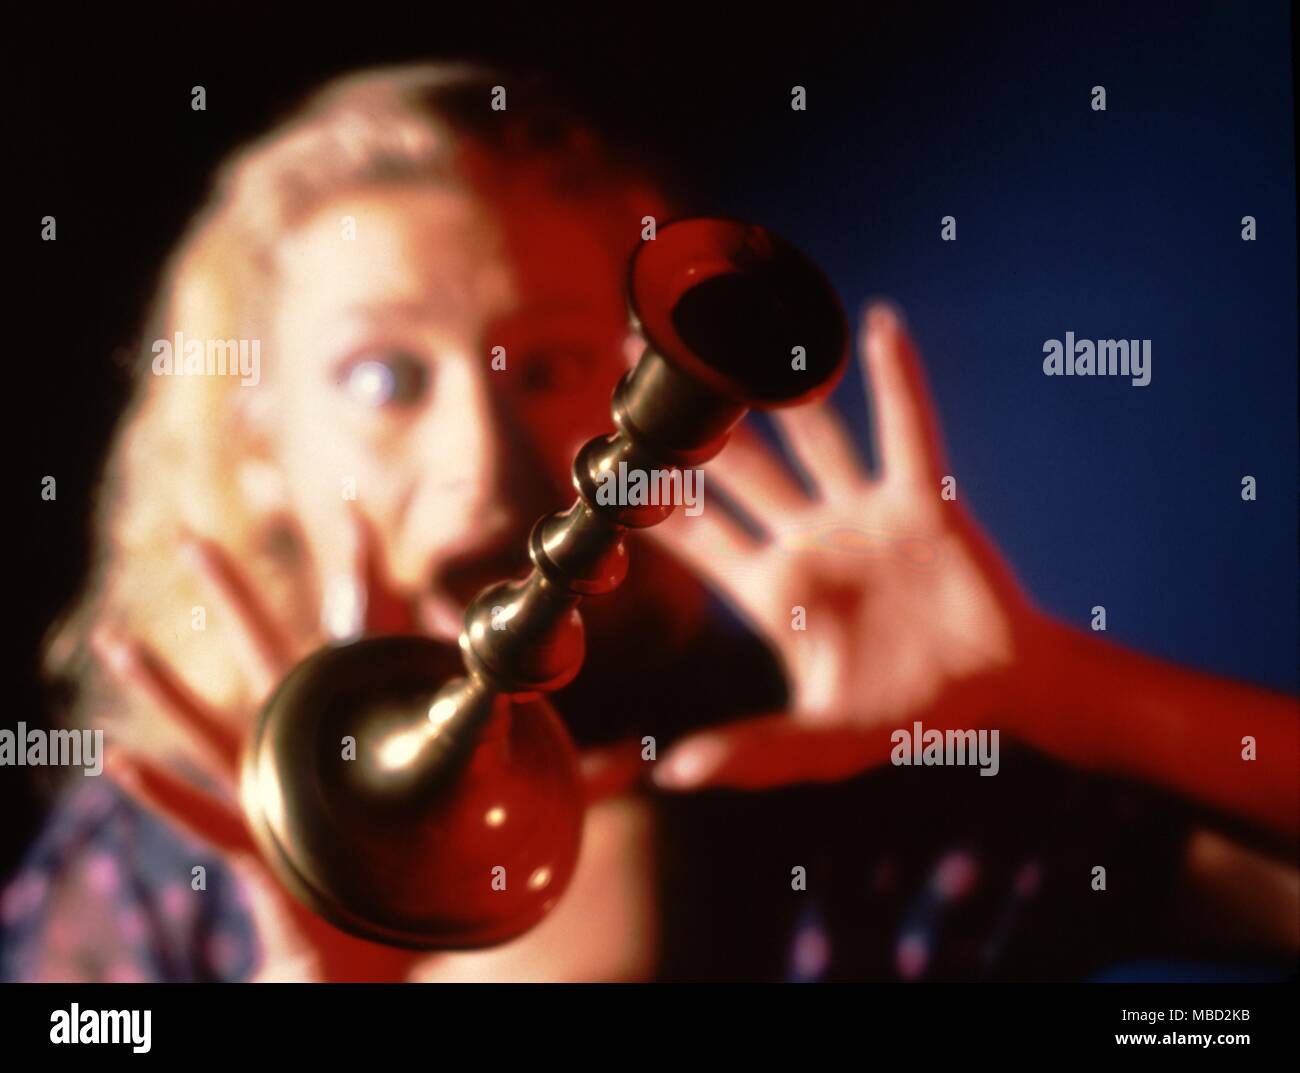 Woman trying to avoid a heavy candlestick thrown by a poltergeist. Stock Photo